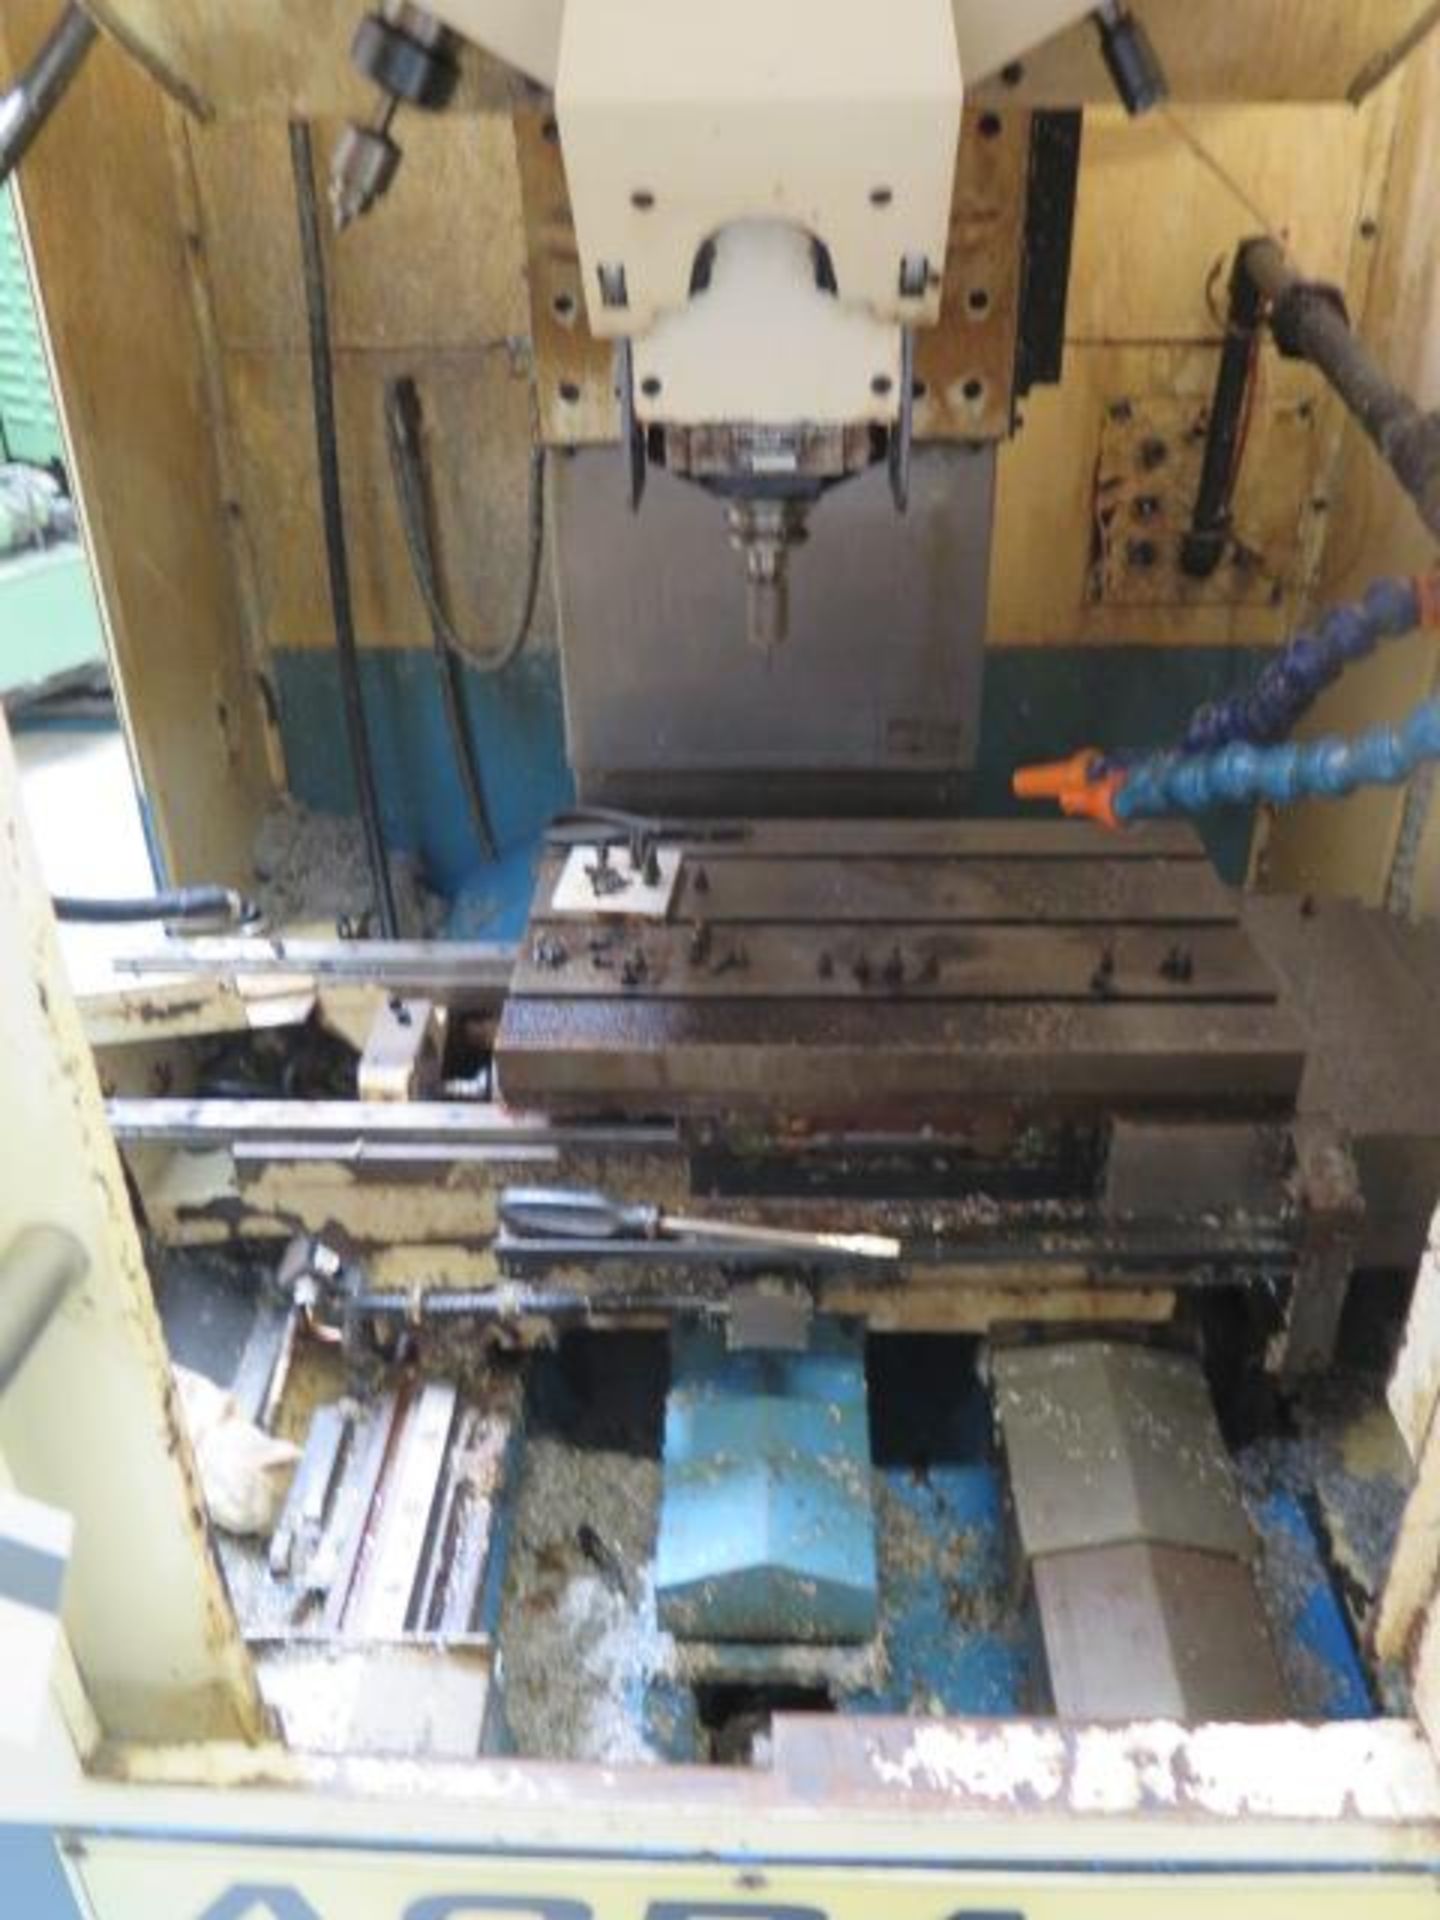 2003 Acra ADT-450 CNC Drilling /Tapping Center s/n MA5V0012285 (NEEDS REPAIR) w/ Mits 50M, OLD AS IS - Image 4 of 14